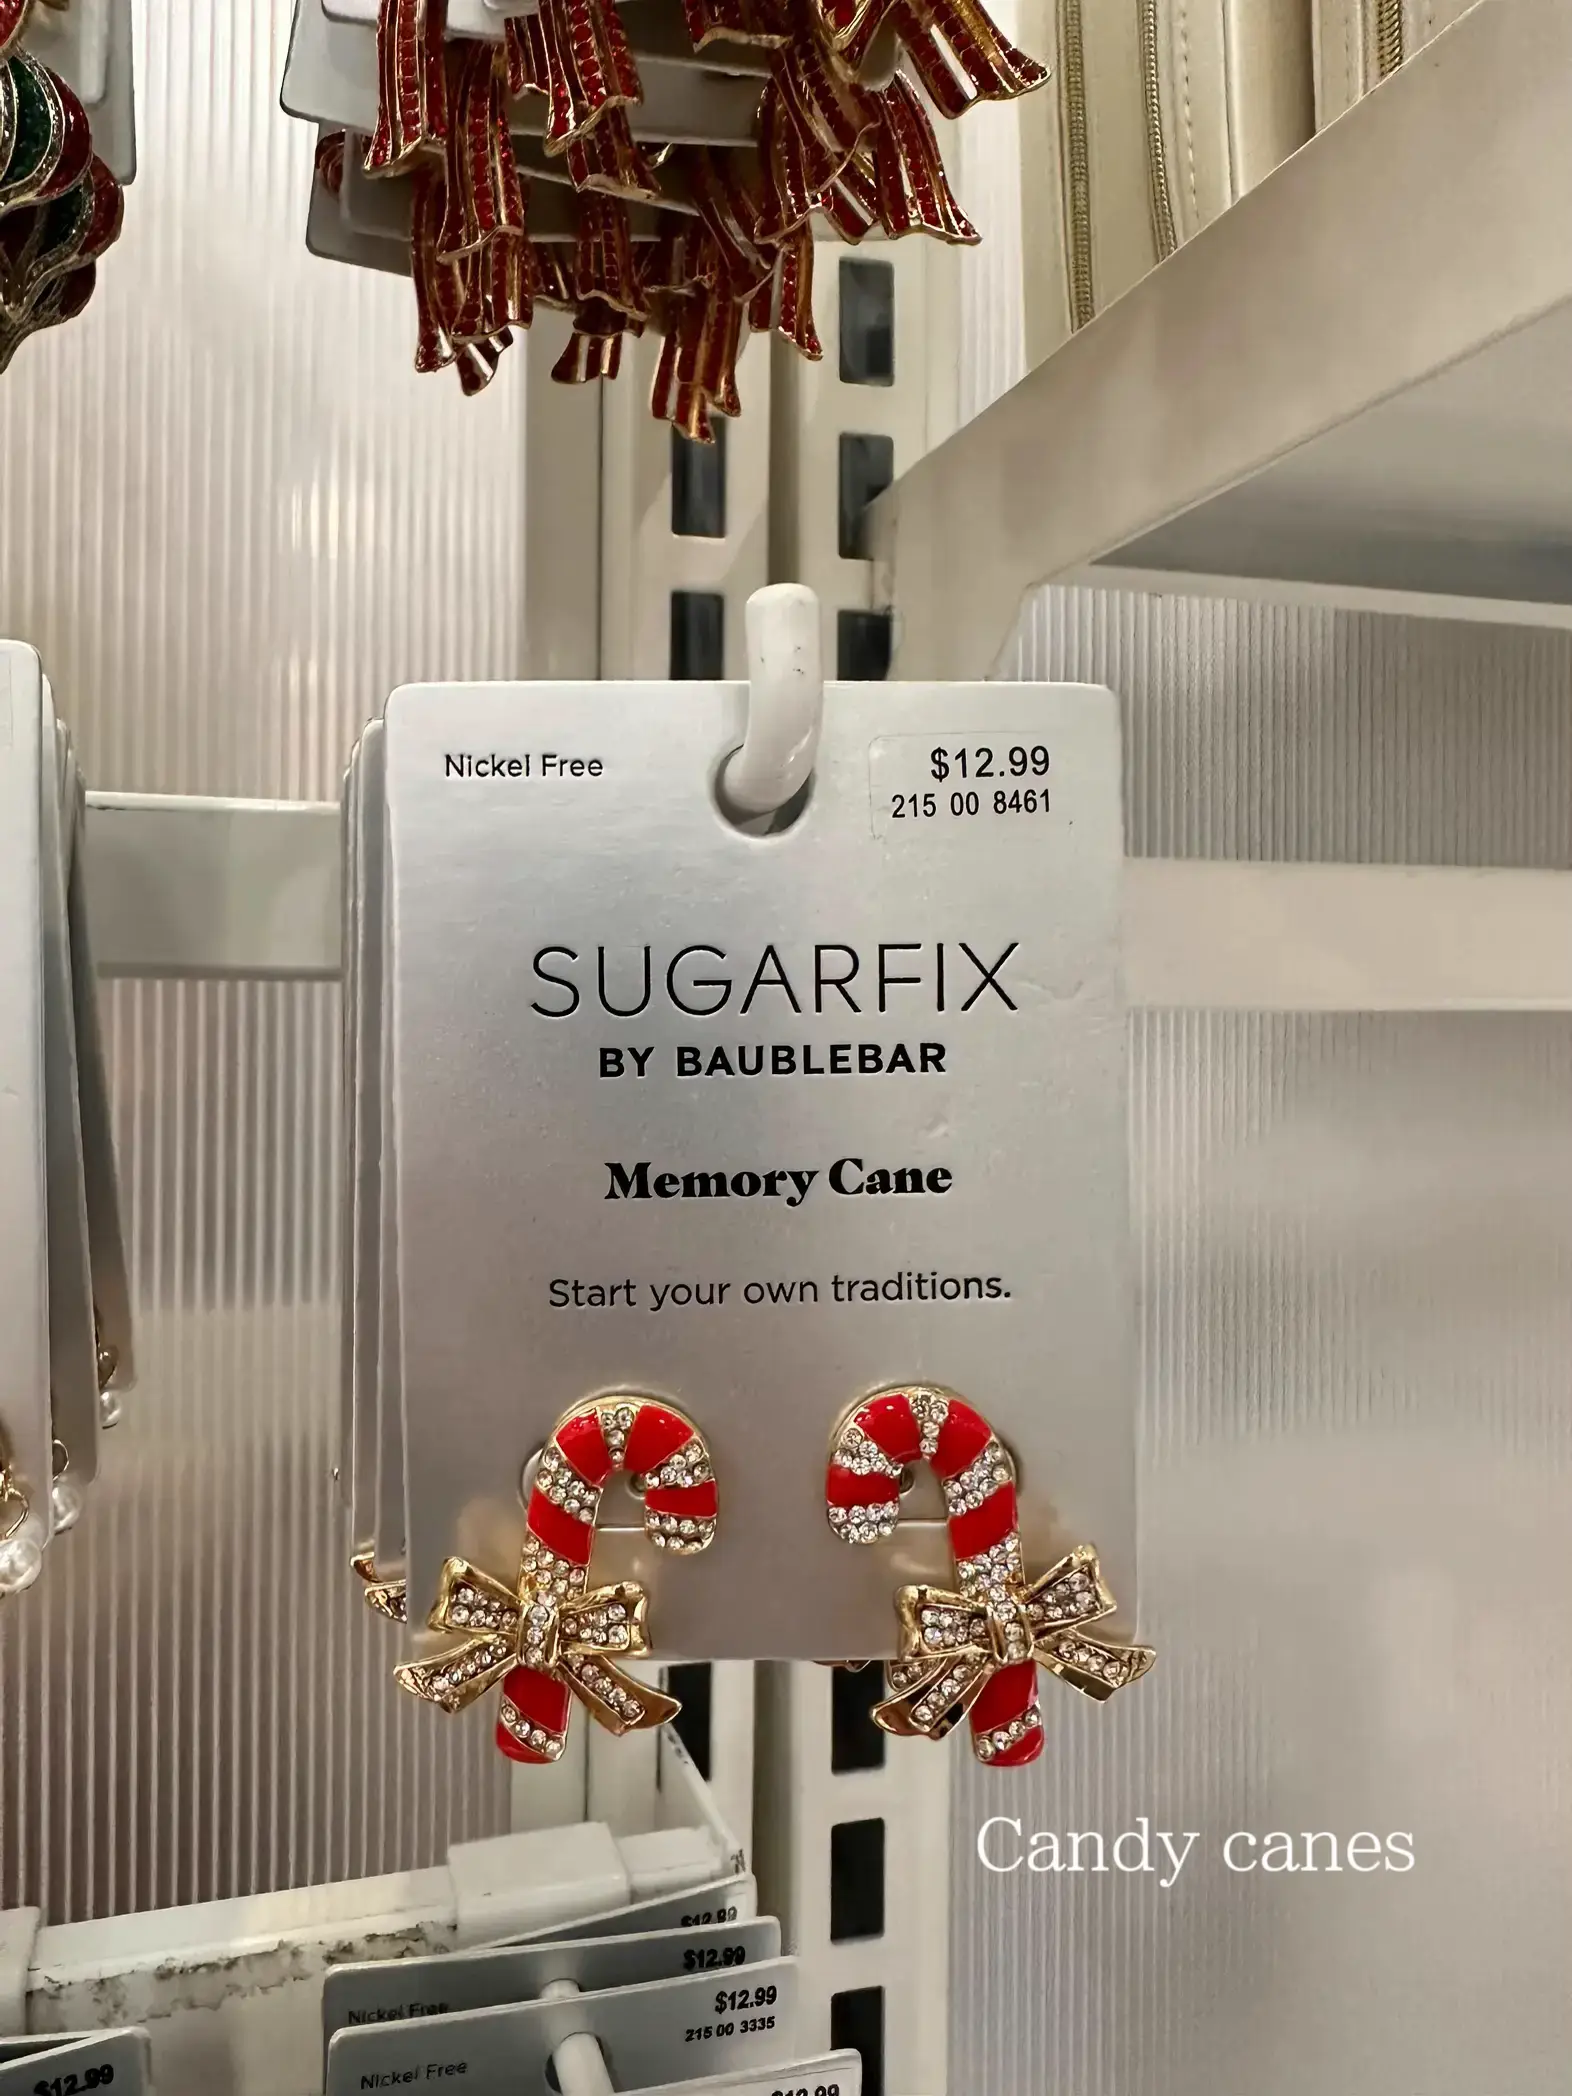  A shelf with a sign that says "Sugar Fix" by Bauble Bar